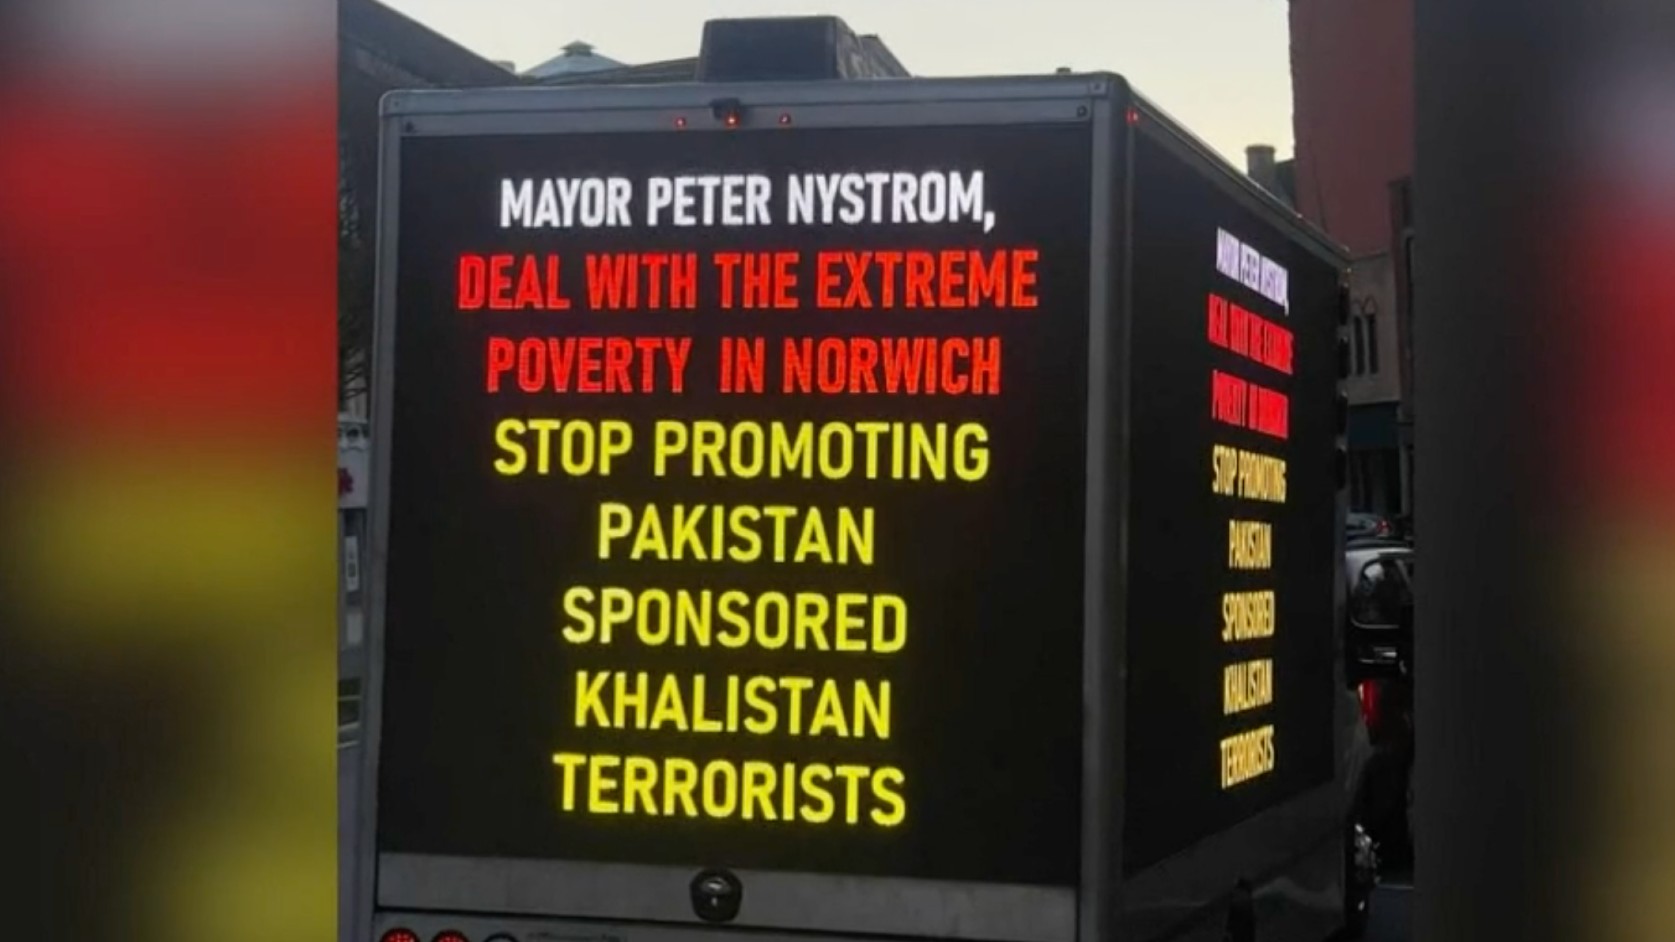 One of the images on the truck seen in Norwich (Screengrab)